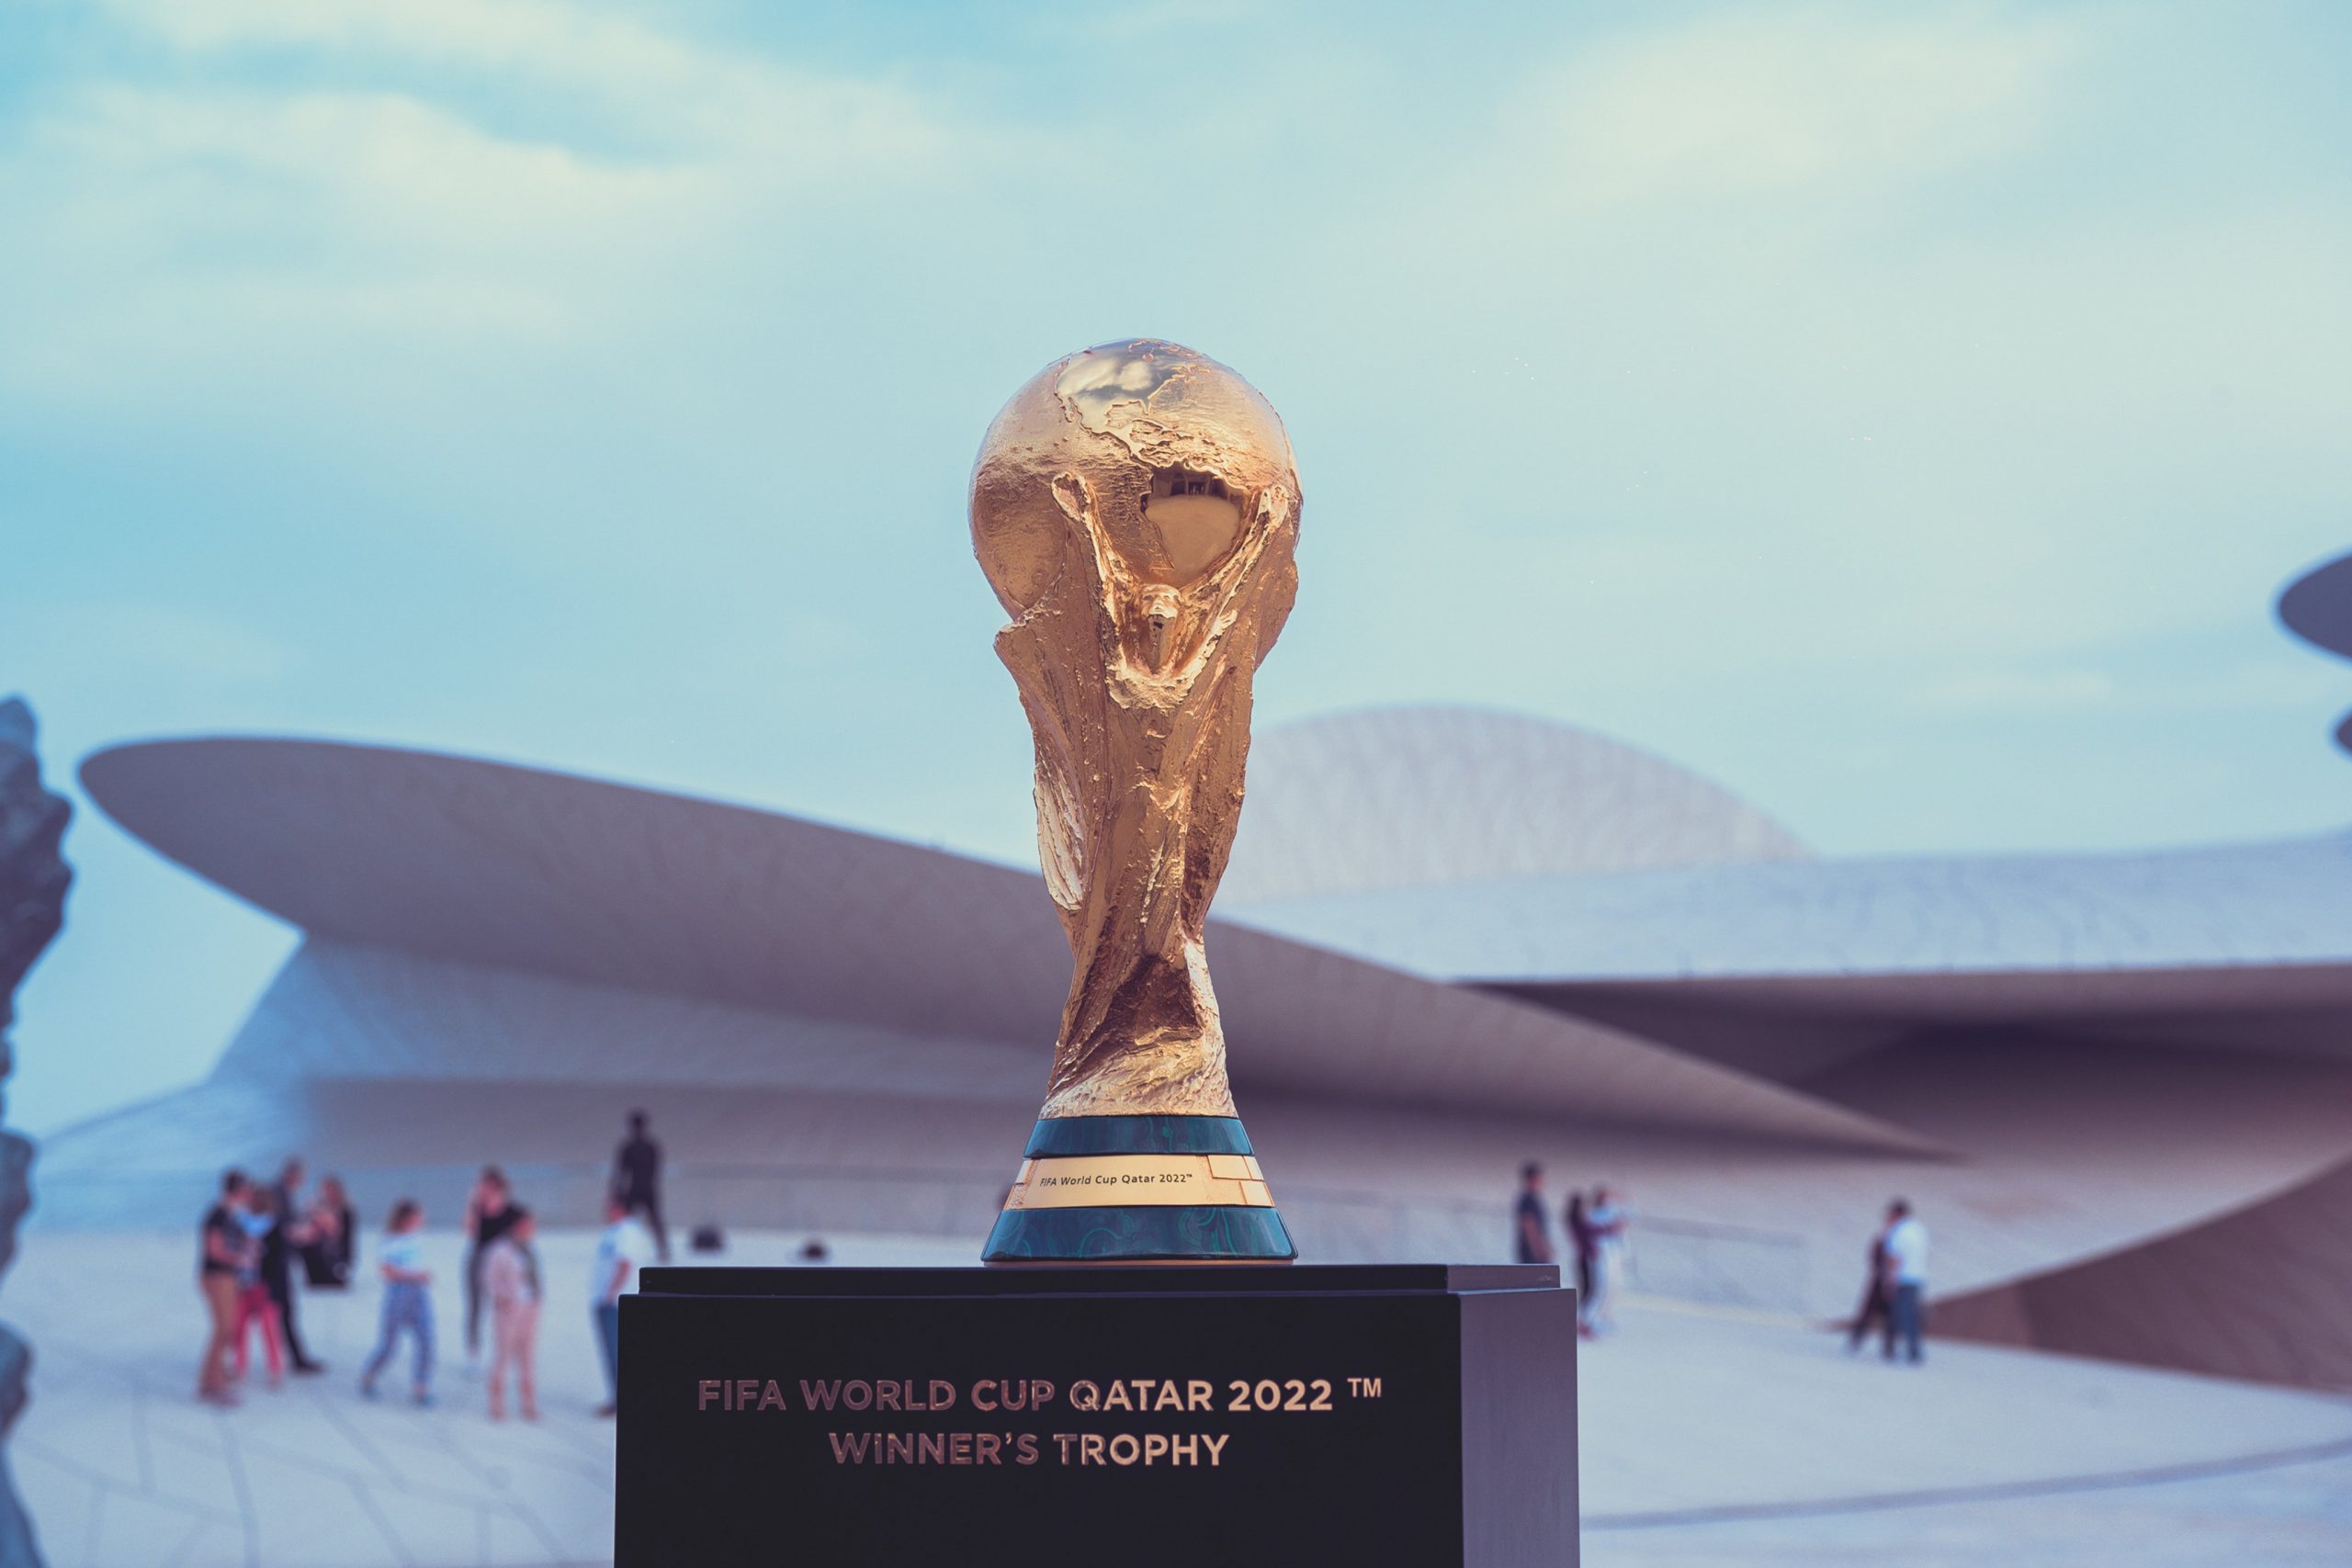 Promotional Tour for Original FIFA World Cup Qatar 2022 Continues